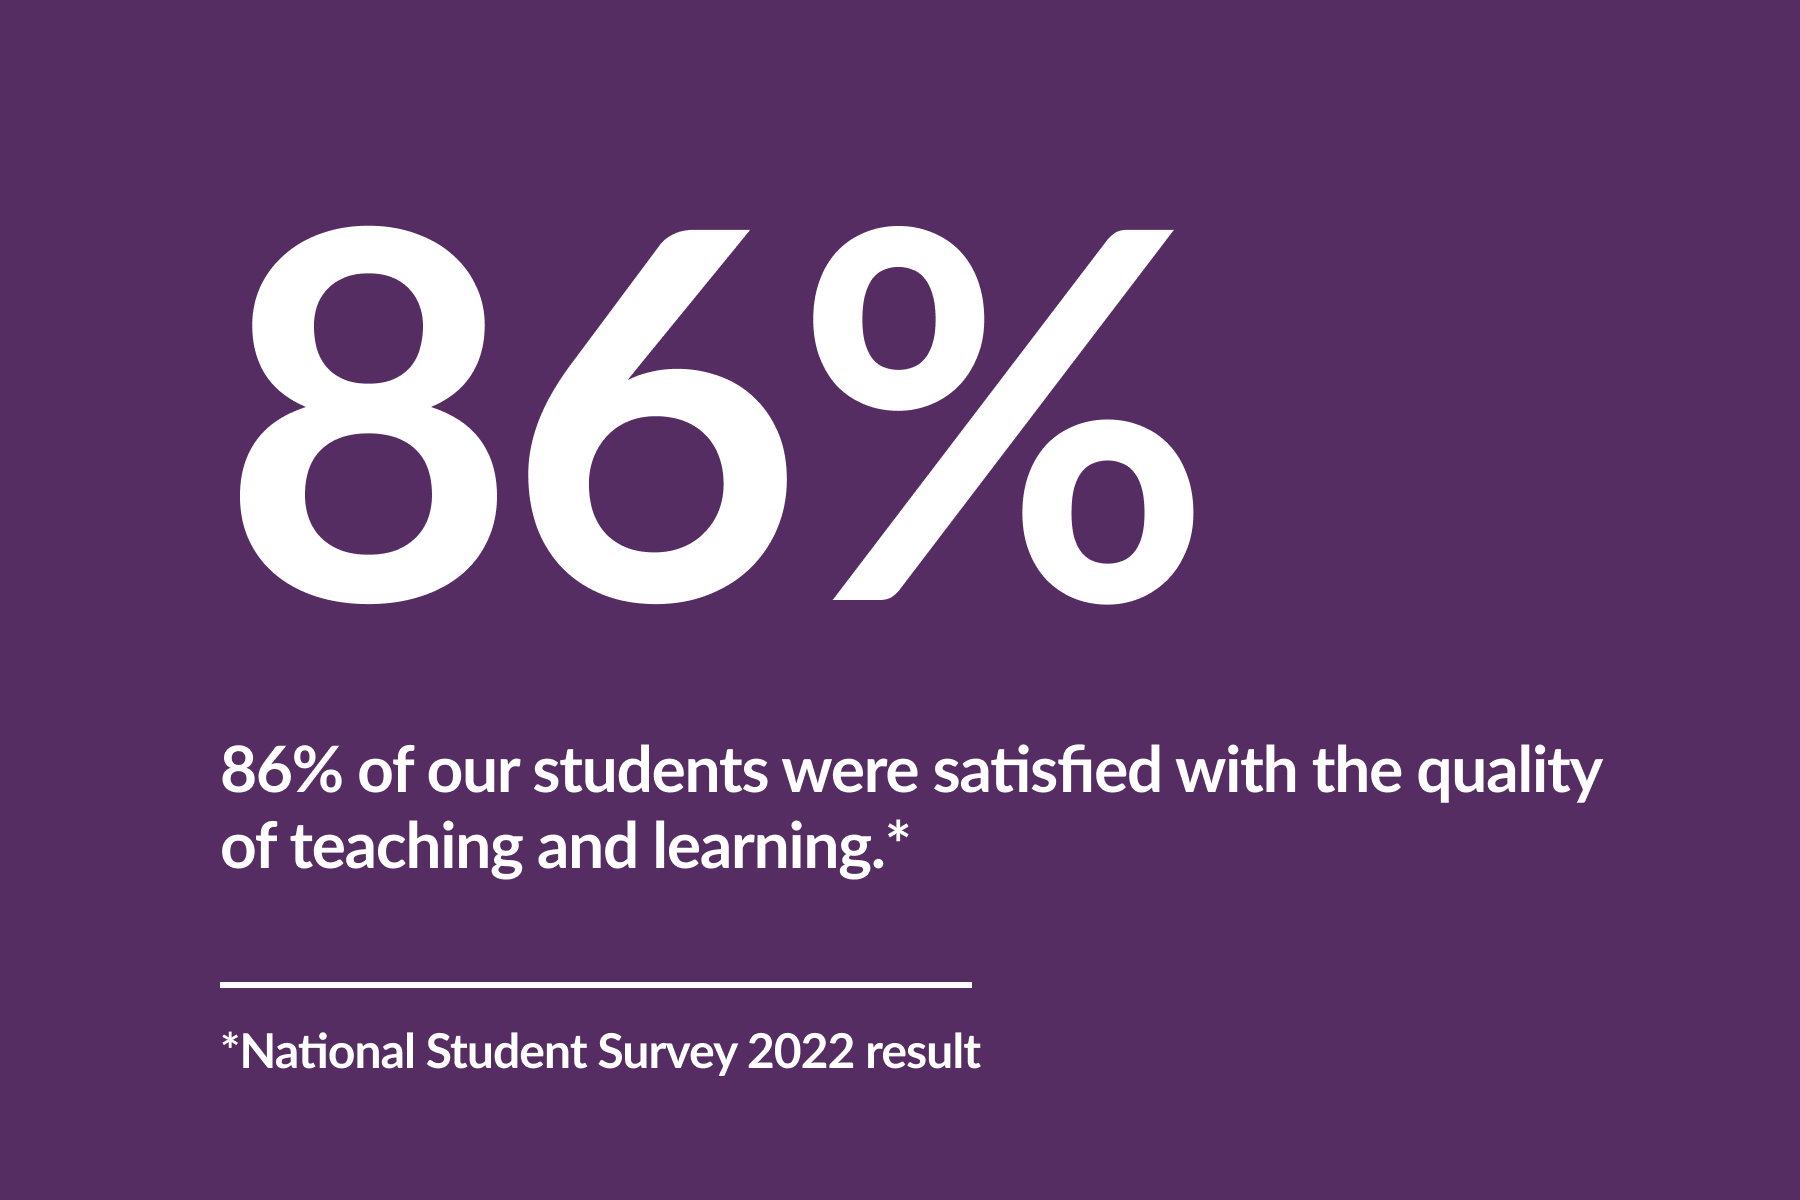 graphics that summarises the National Student Survey 2022 result:'86% of our students were satisfied with the quality of teaching and learning.'